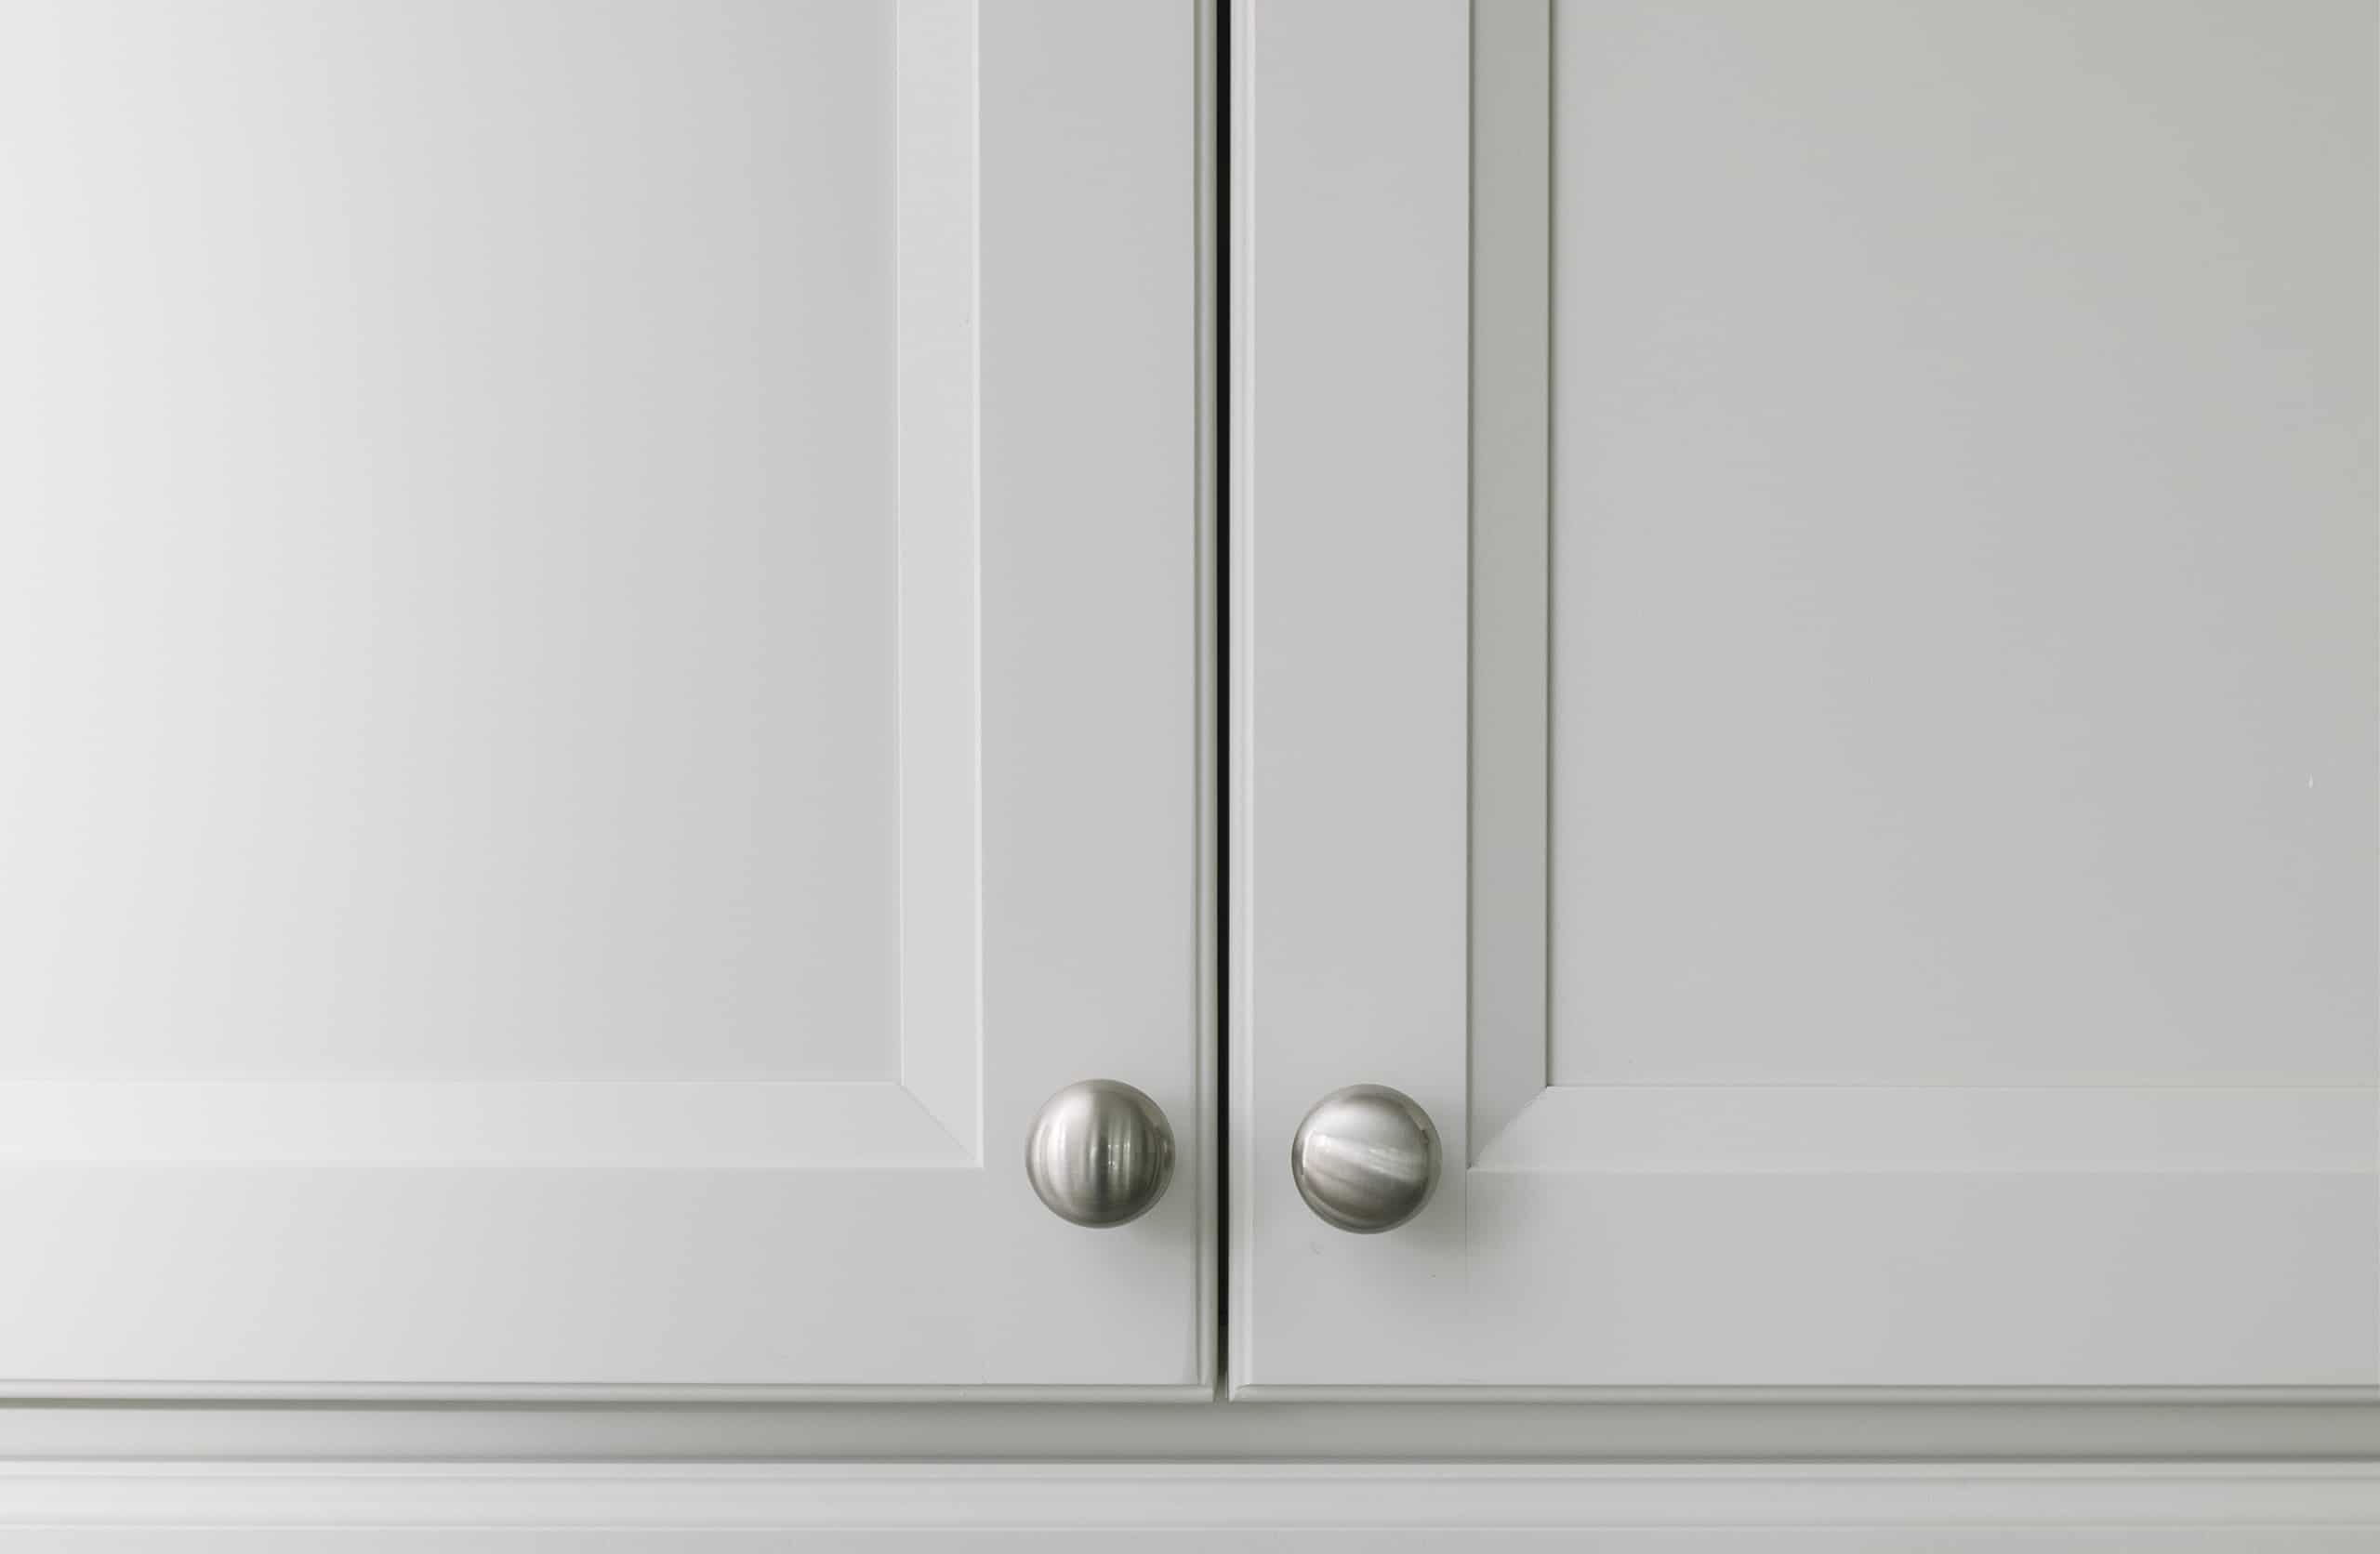 How To Install Knobs On Cabinet Doors, How To Install Door Knobs On Kitchen Cabinets